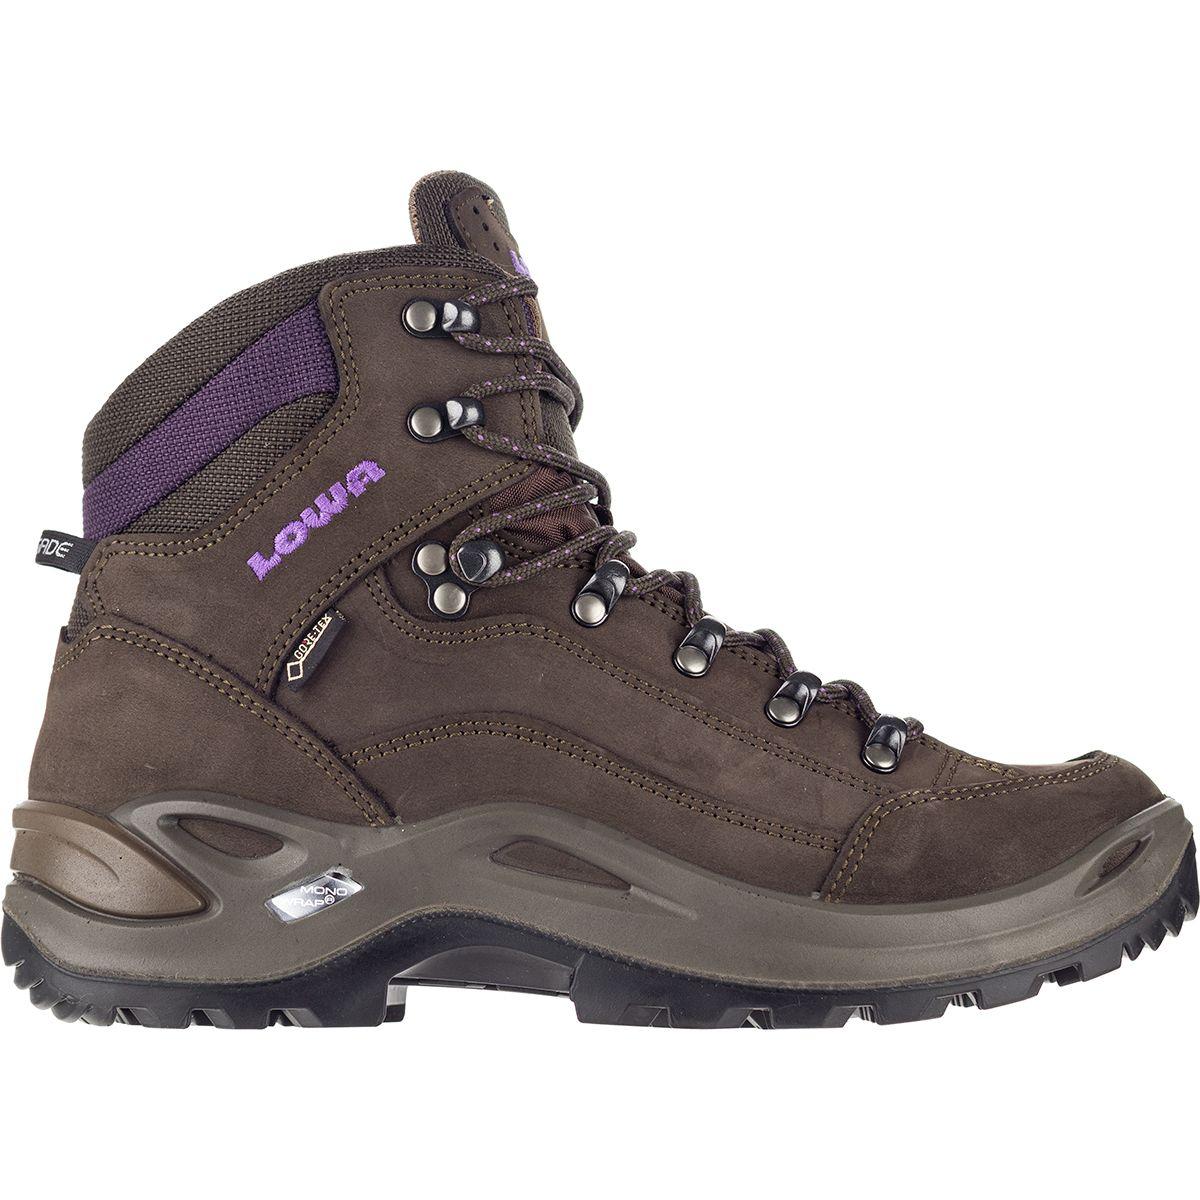 Lowa Synthetic Renegade Gtx Mid Boot - Lyst